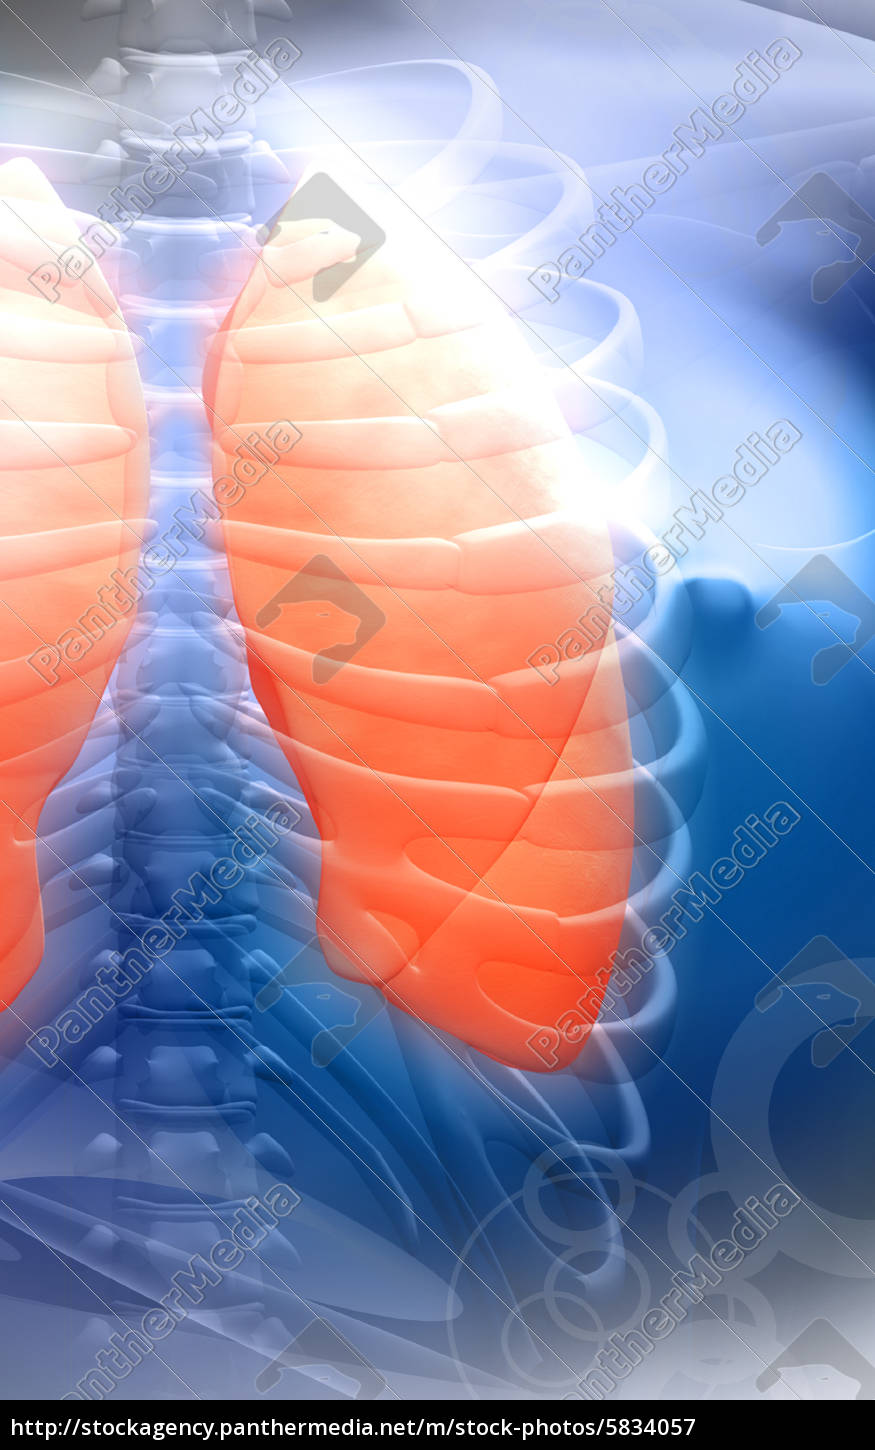 Human body and lungs - Stock Photo - #5834057 - PantherMedia Stock Agency